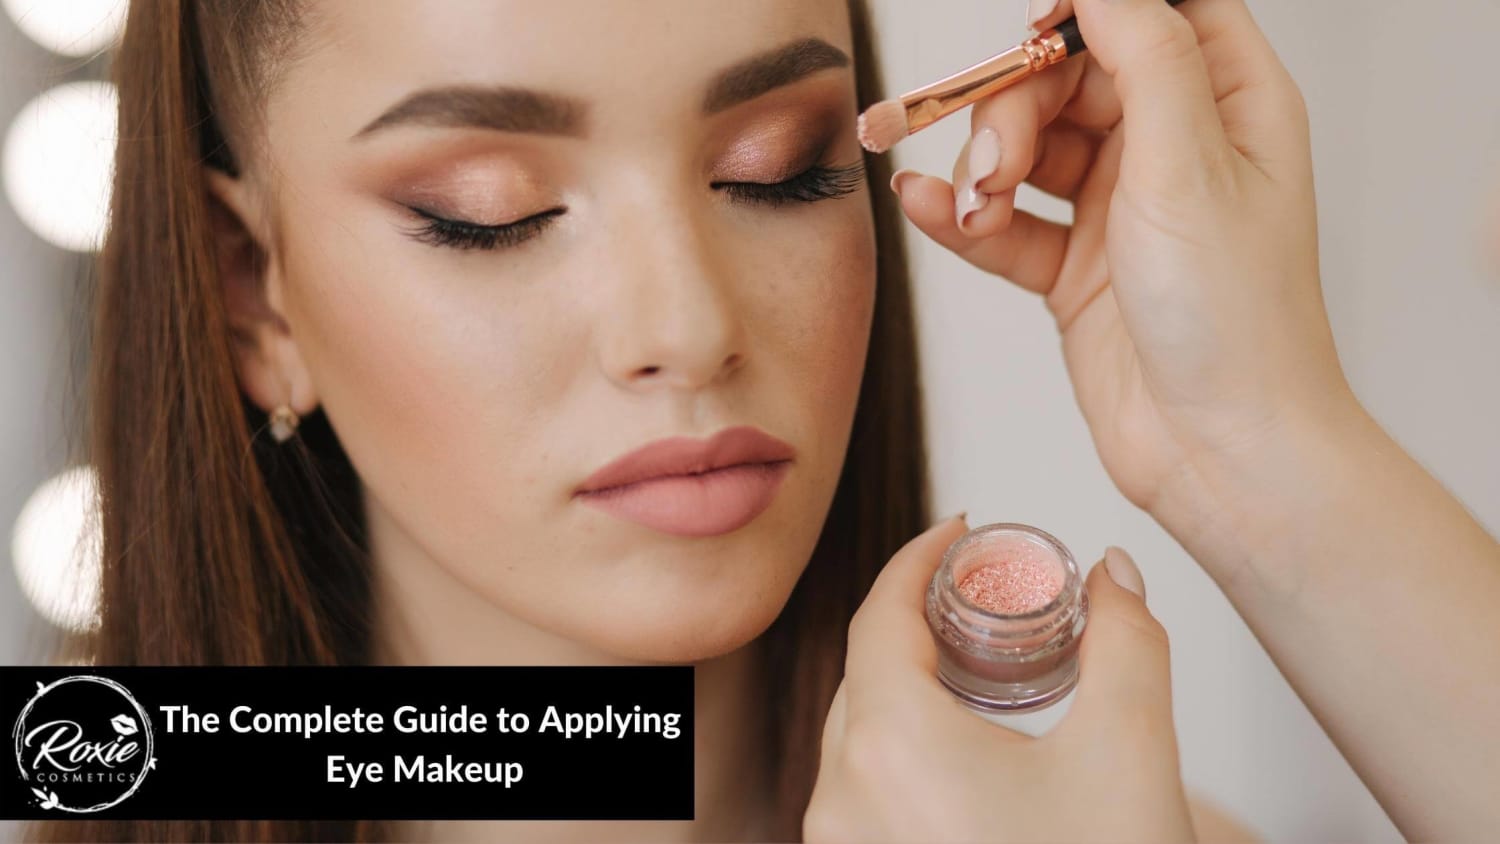 The Complete Guide to Applying Eye Makeup